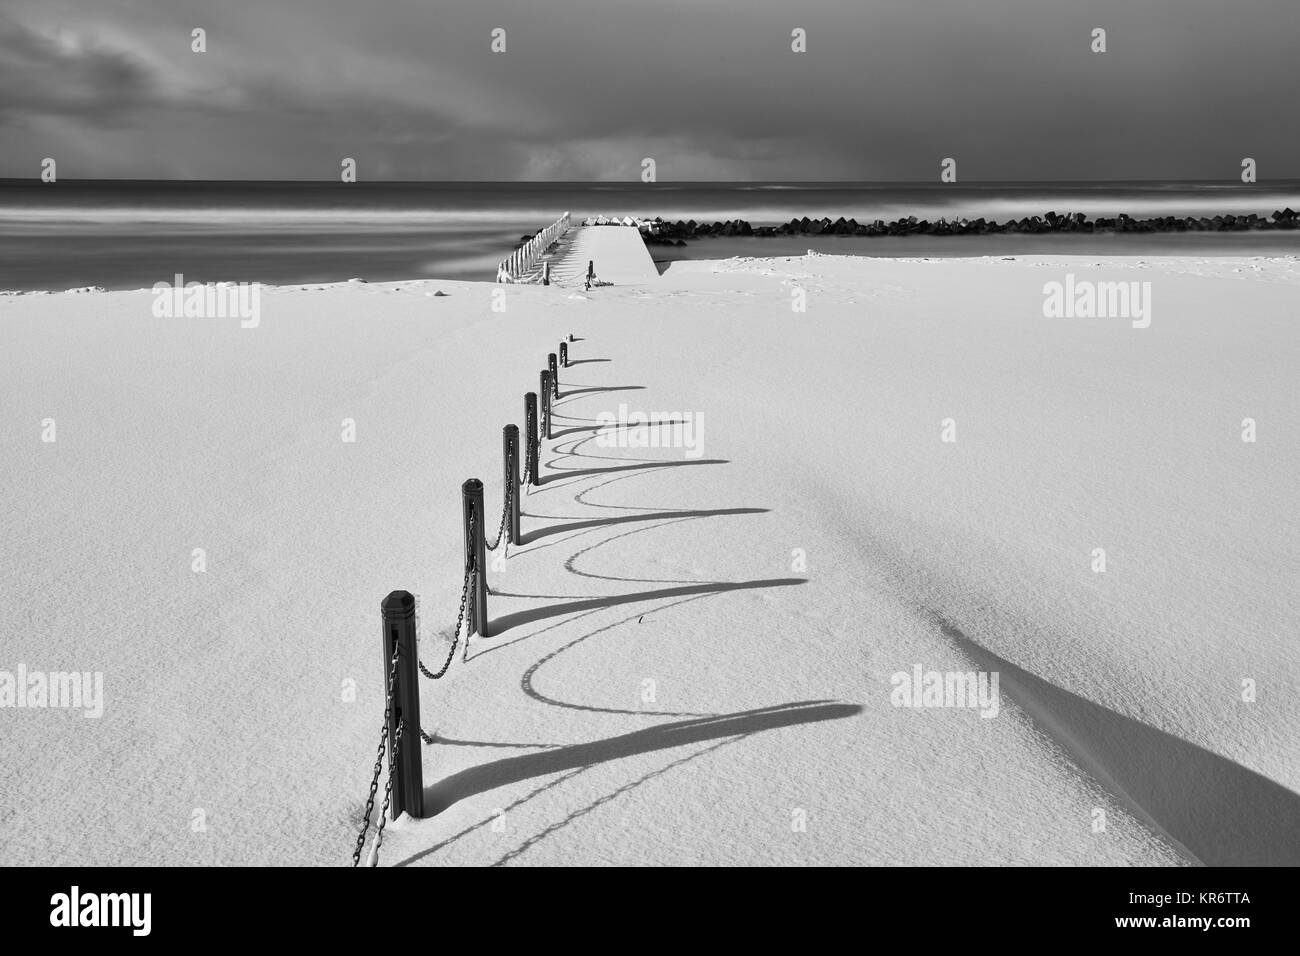 Fence running along a snow-covered beach near the ocean in winter. Stock Photo